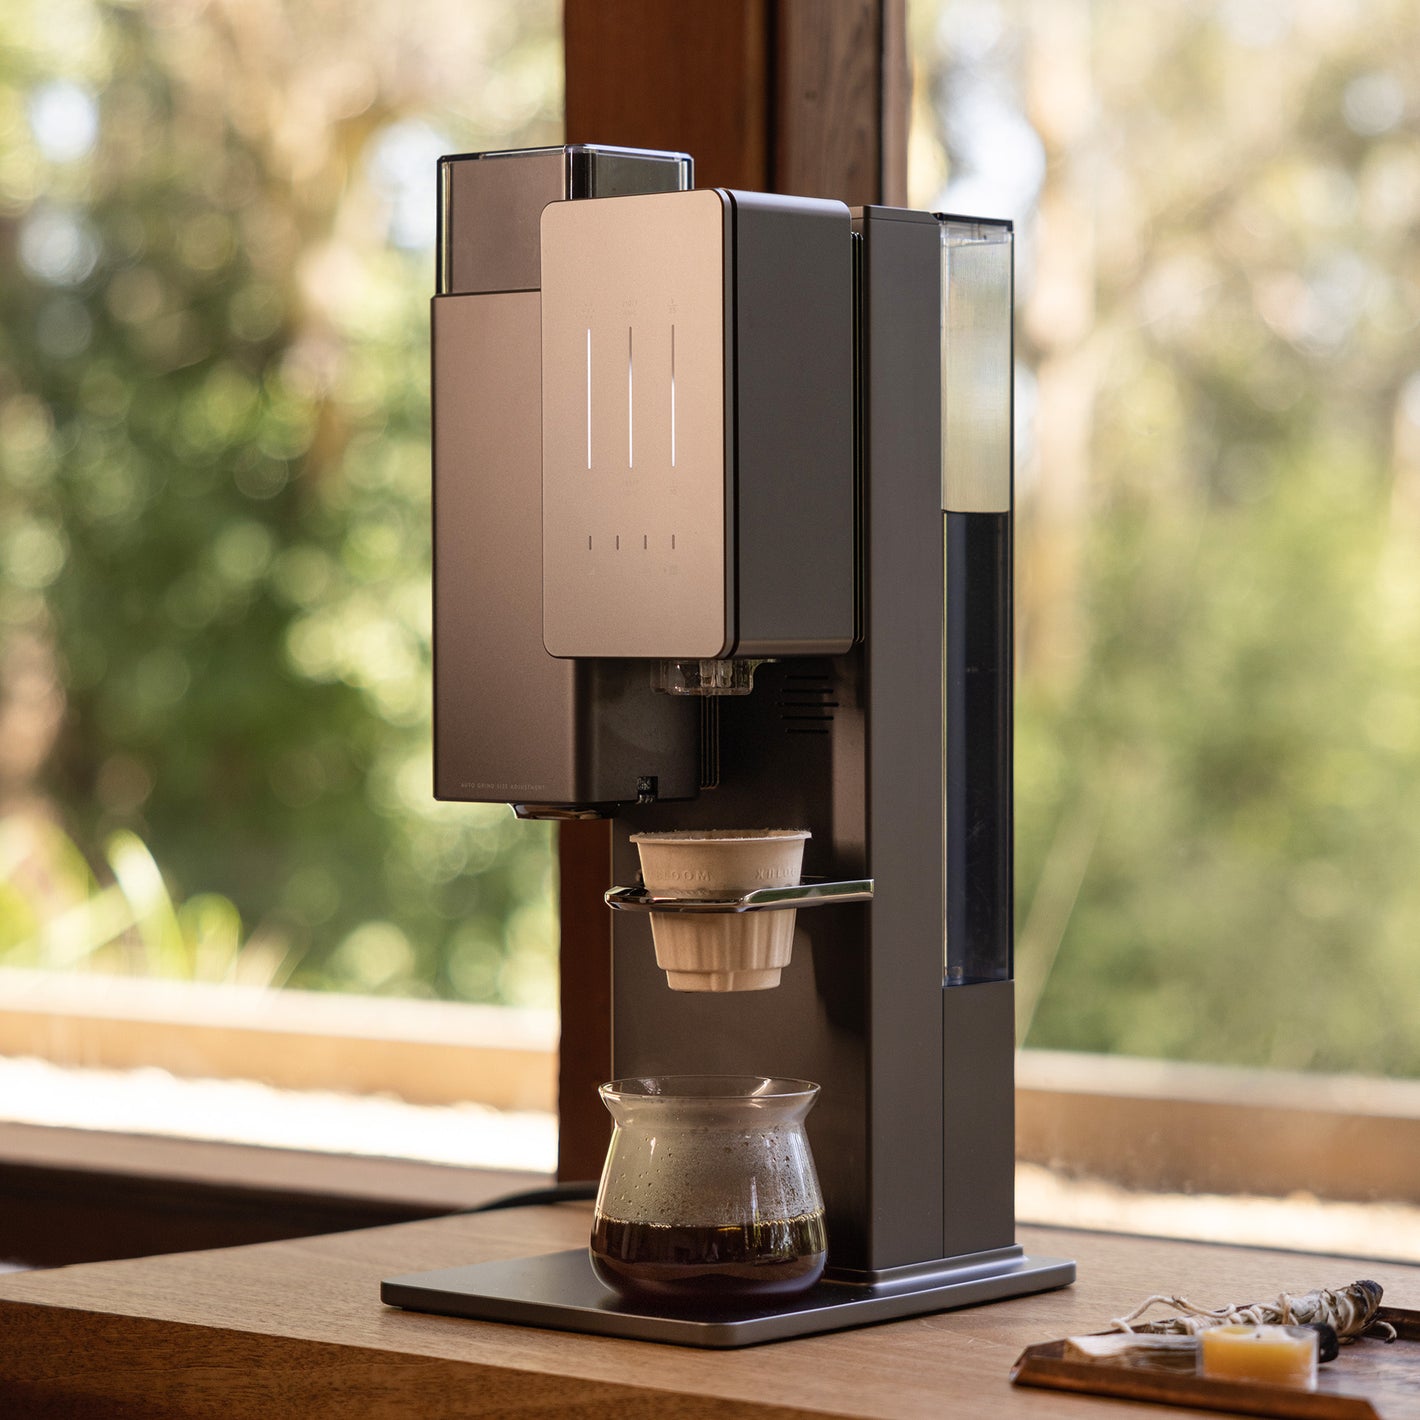 xBloom Coffee Maker Lets You Enjoy Barista Coffee at Home